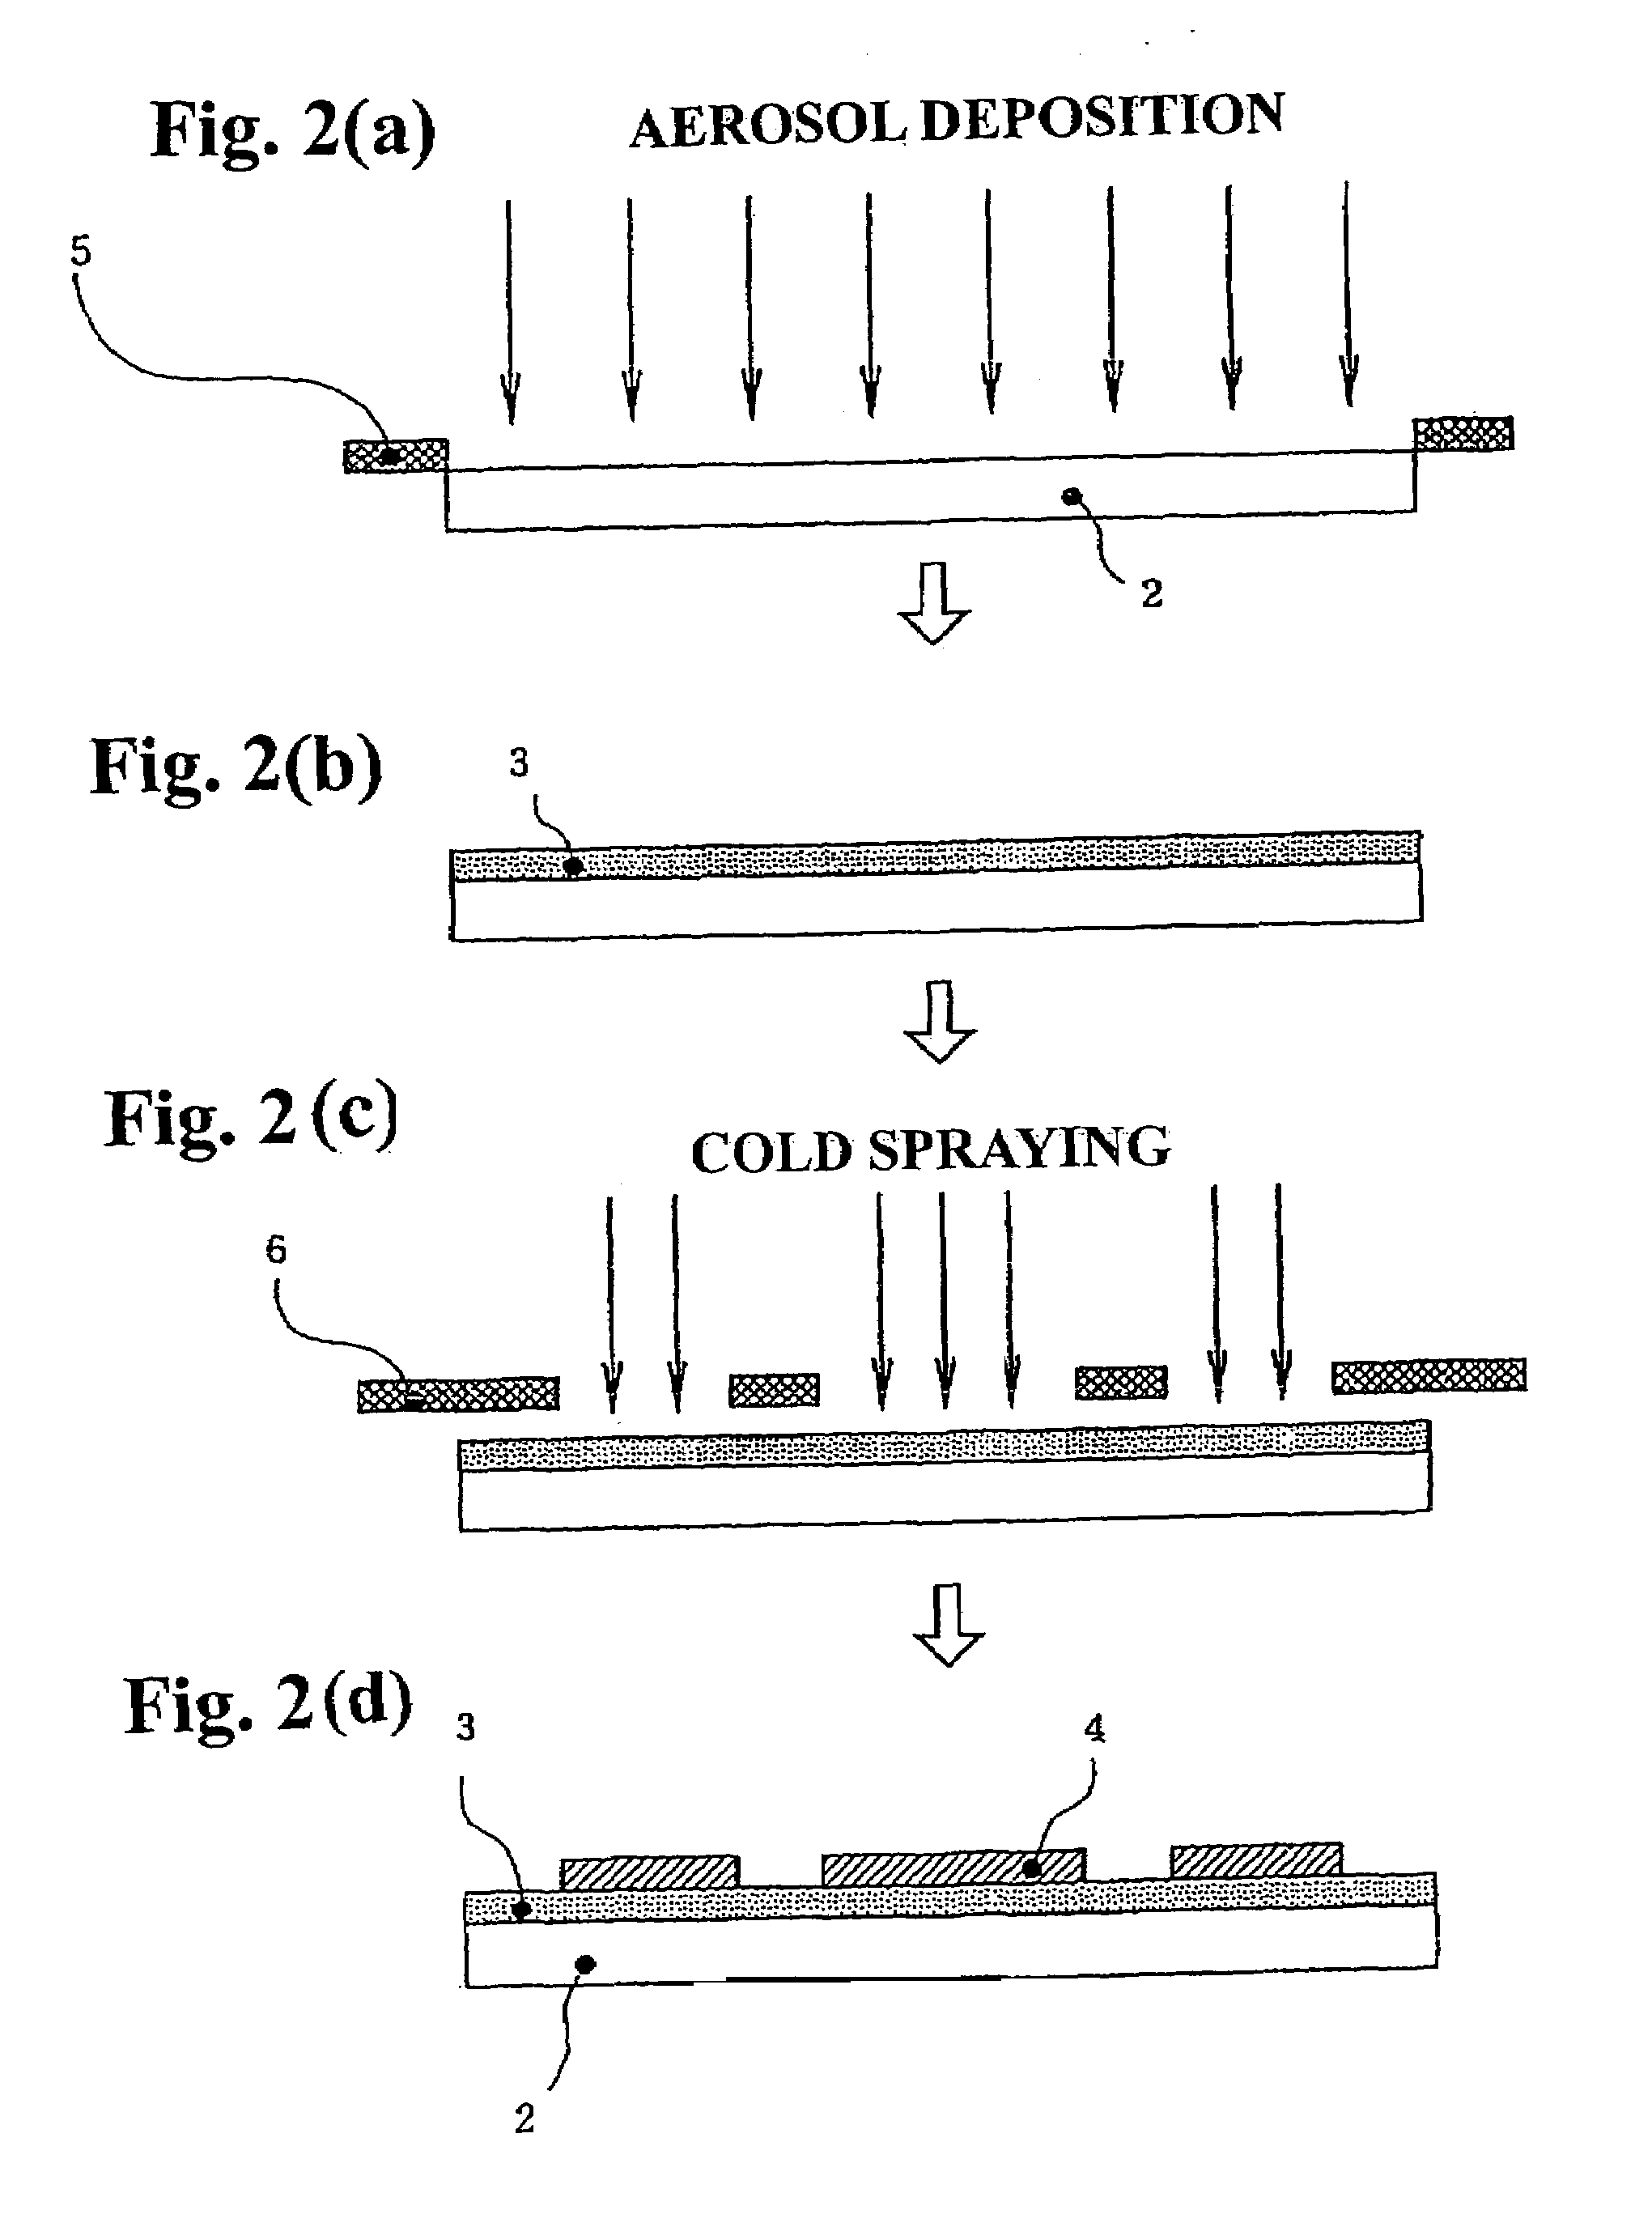 Insulating substrate and semiconductor device having a thermally sprayed circuit pattern